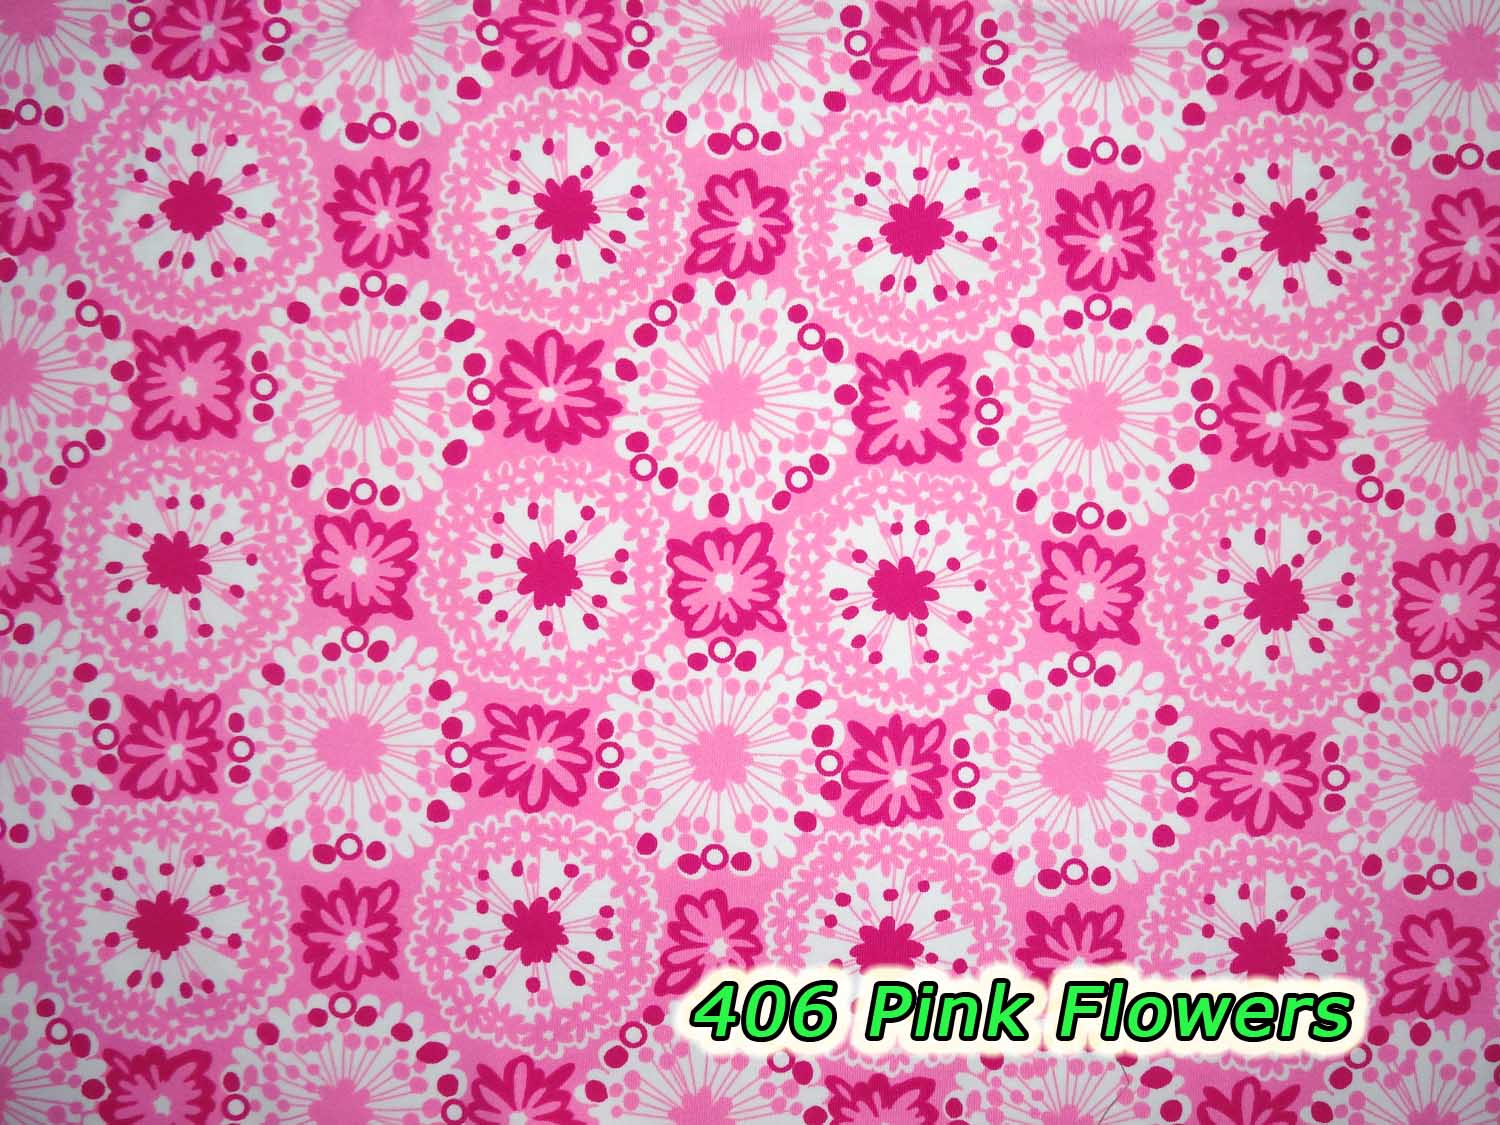 406 Pink Flowers